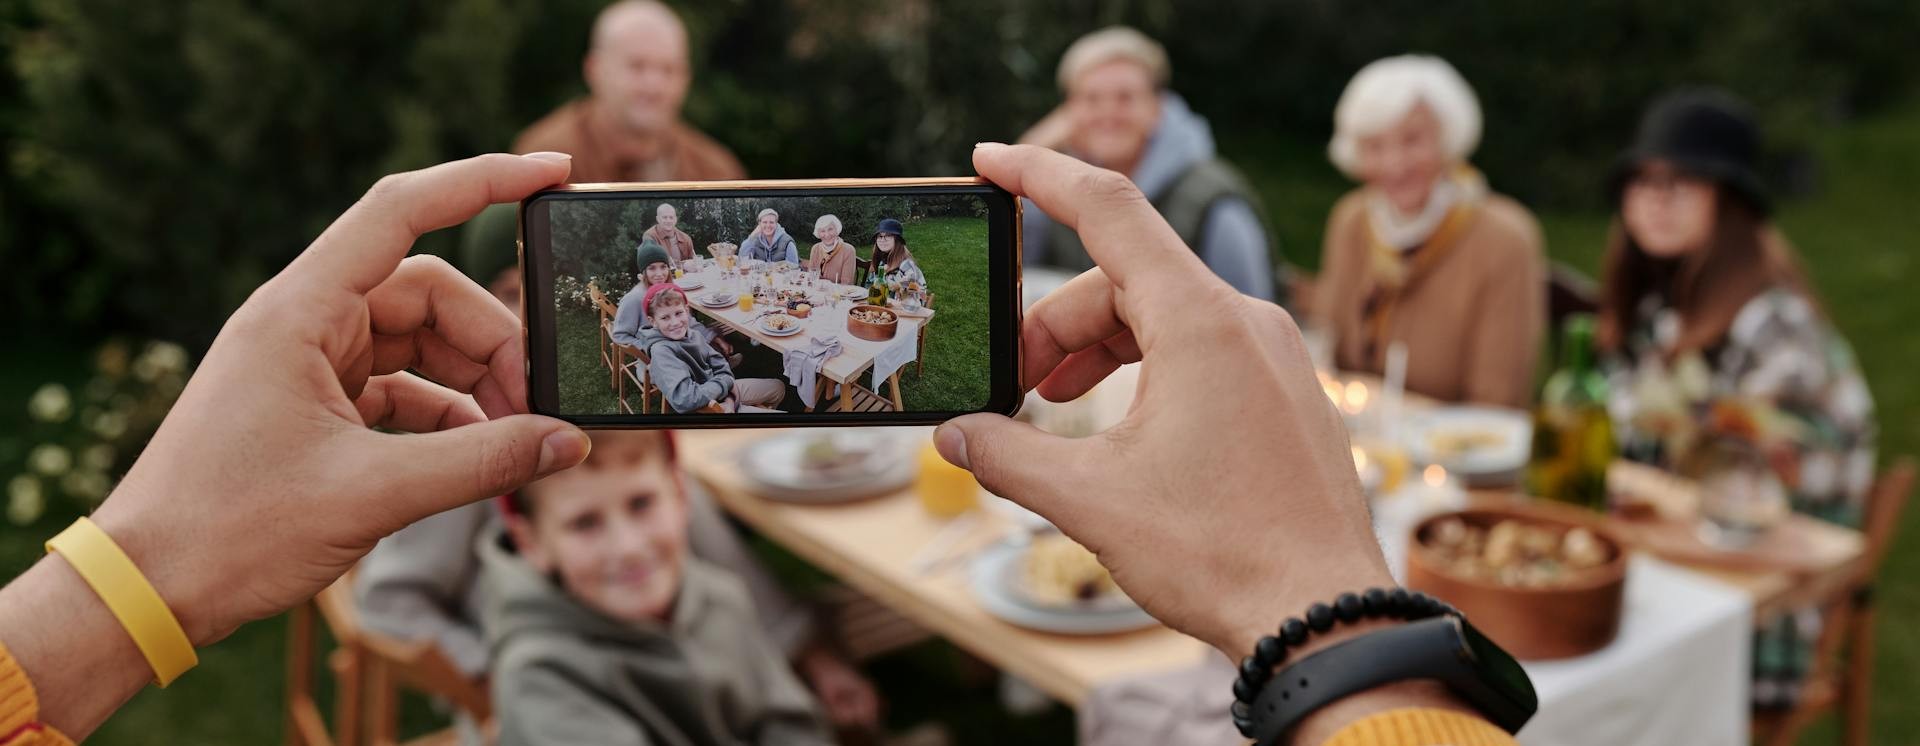 Hands holding up a smartphone that is taking a picture of a group sitting around a table in a garden